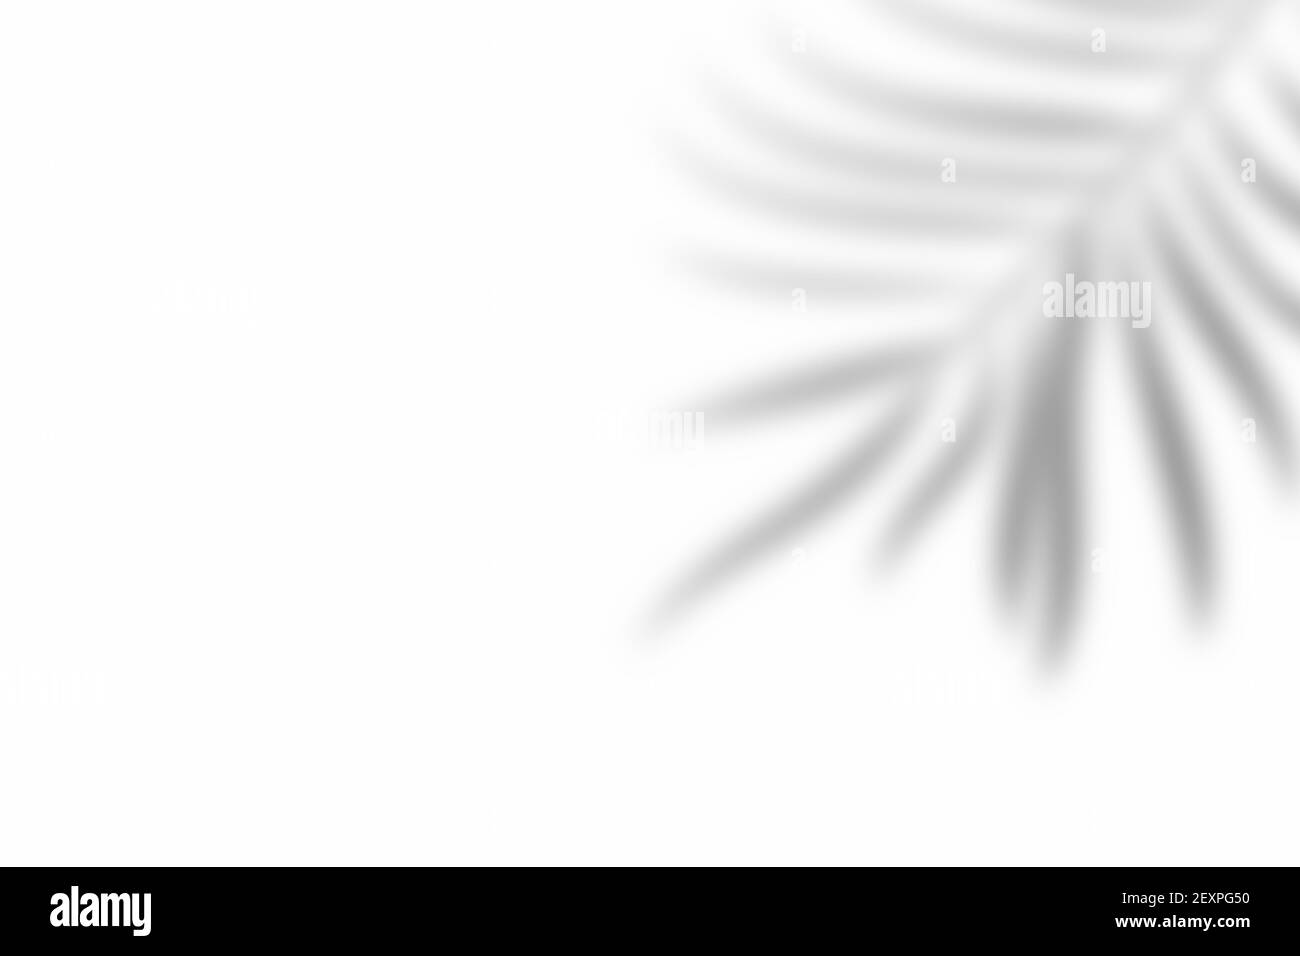 Shadow of leaf overlay on white texture background. Use for decorative product presentation. Stock Photo